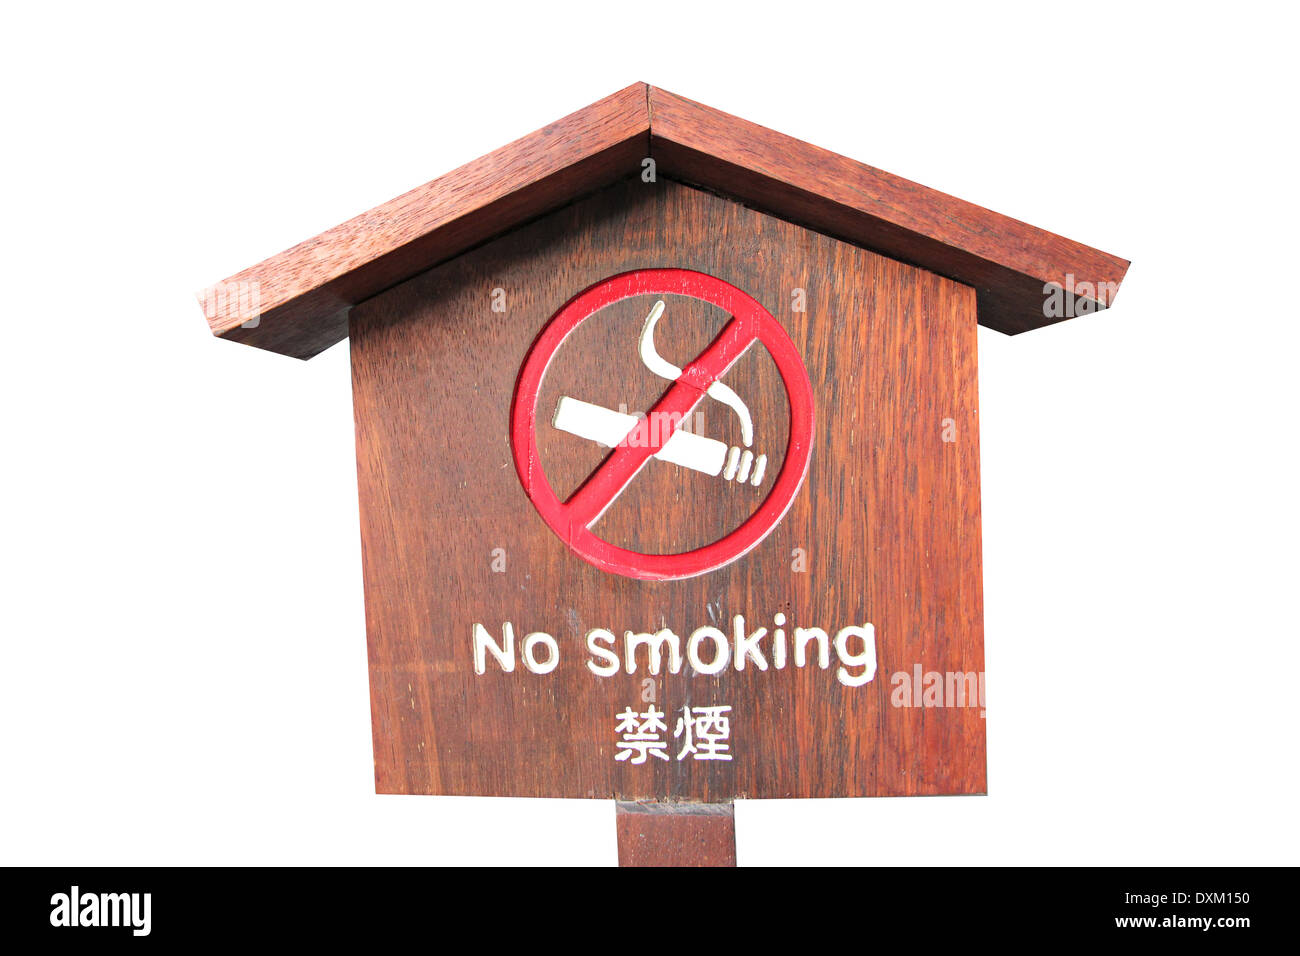 Text No smoking on wooden sign on white background. Stock Photo